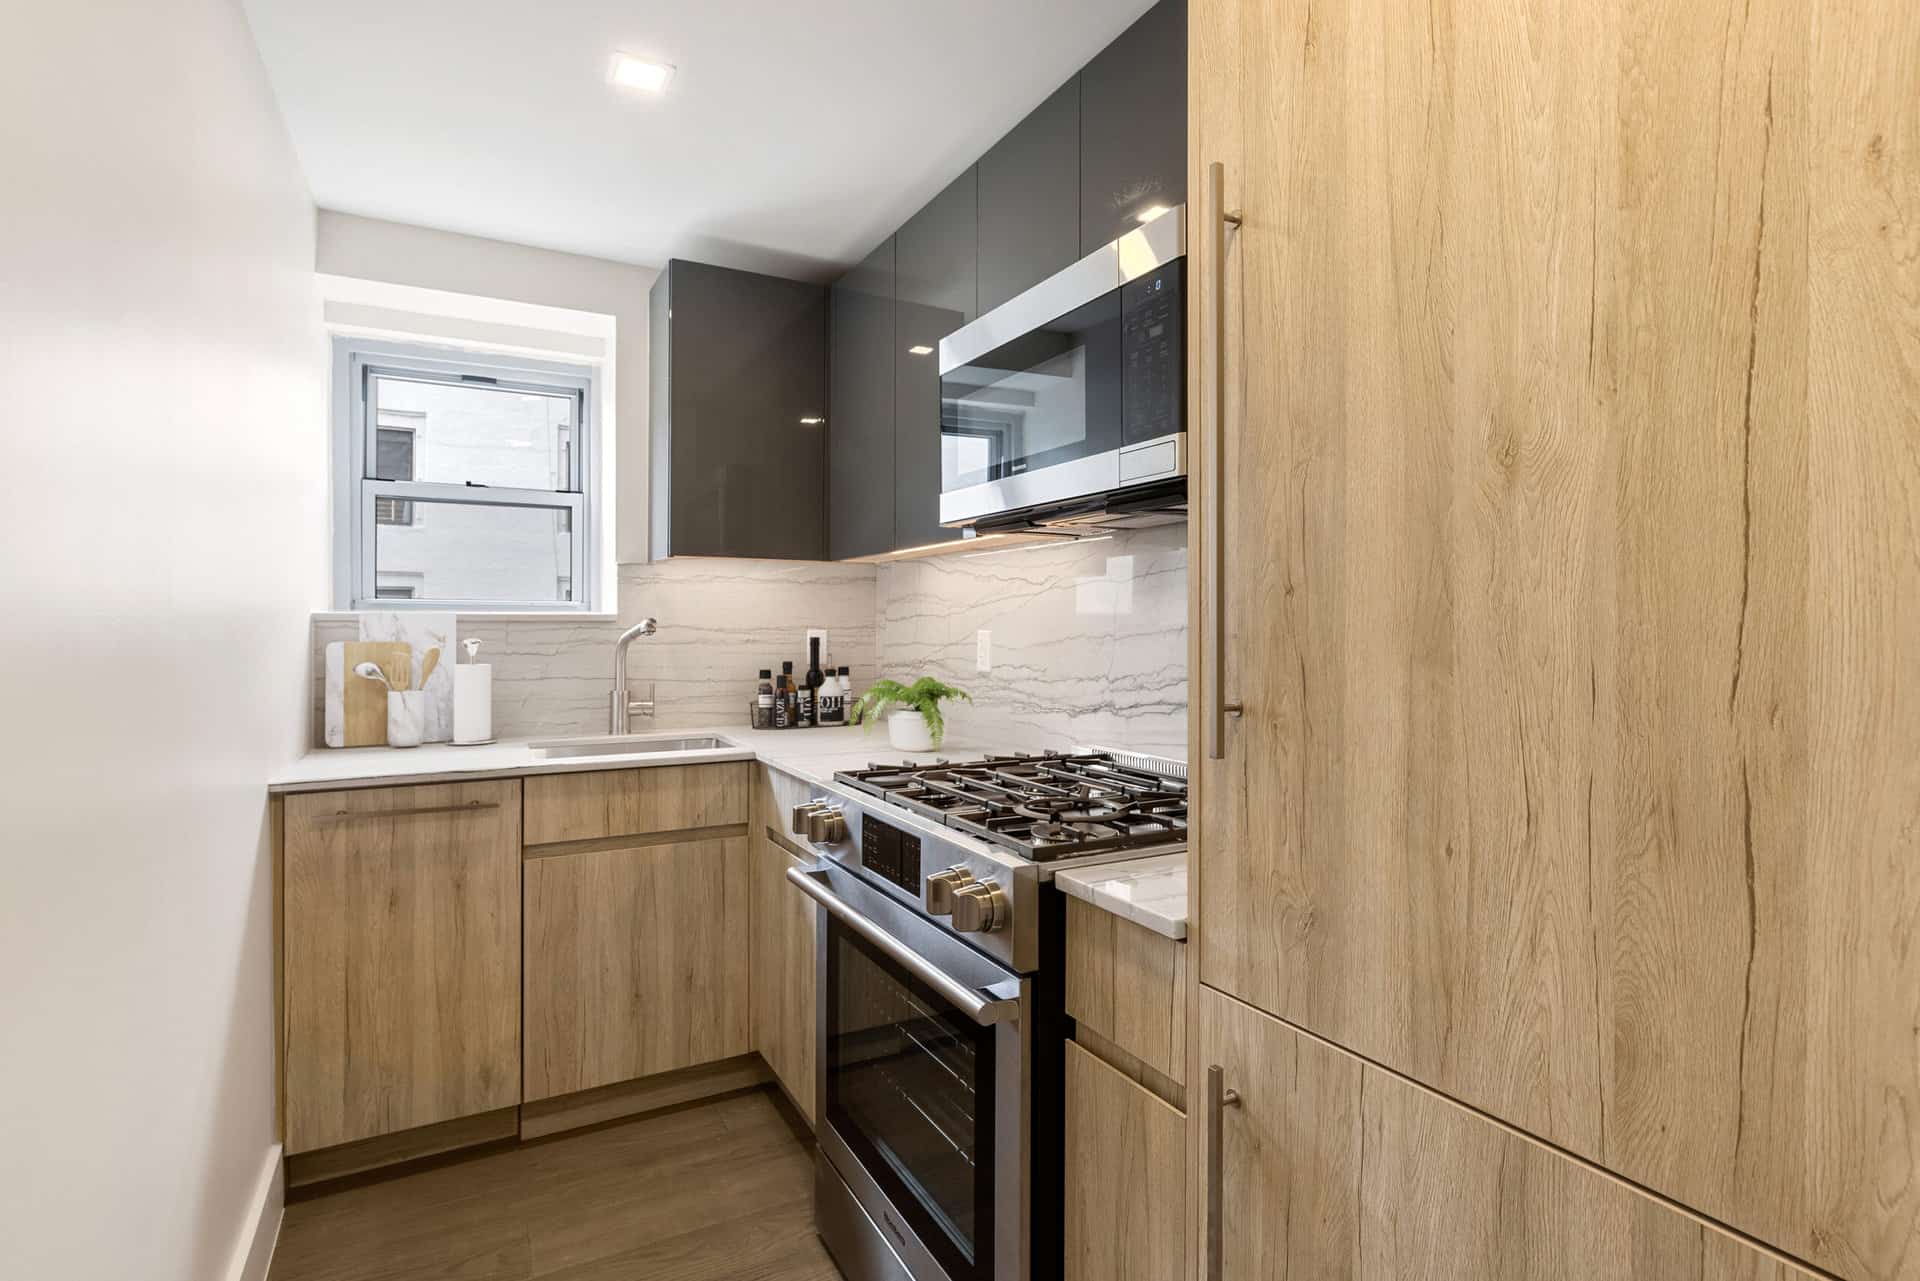 Enclosed kitchen with white stone countertops, stainless steel range & grey upper cabinets at 60 East 12th Street apartments.